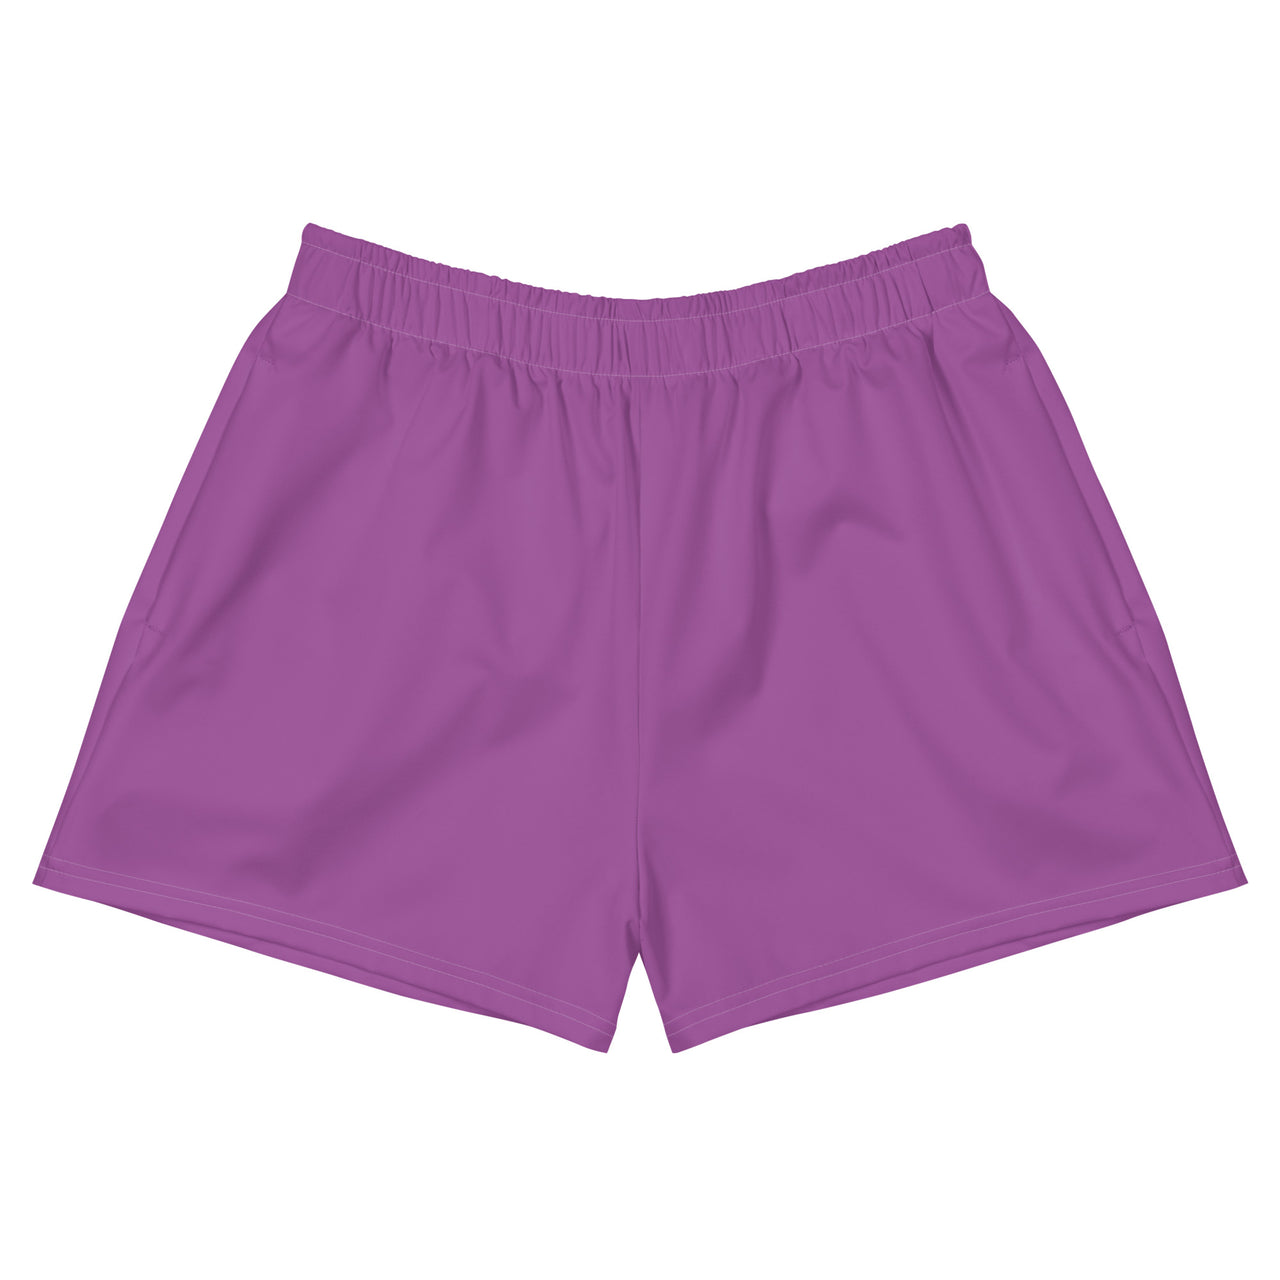 Women’s Recycled Solid Athletic Shorts - Lilac SHAVA CO